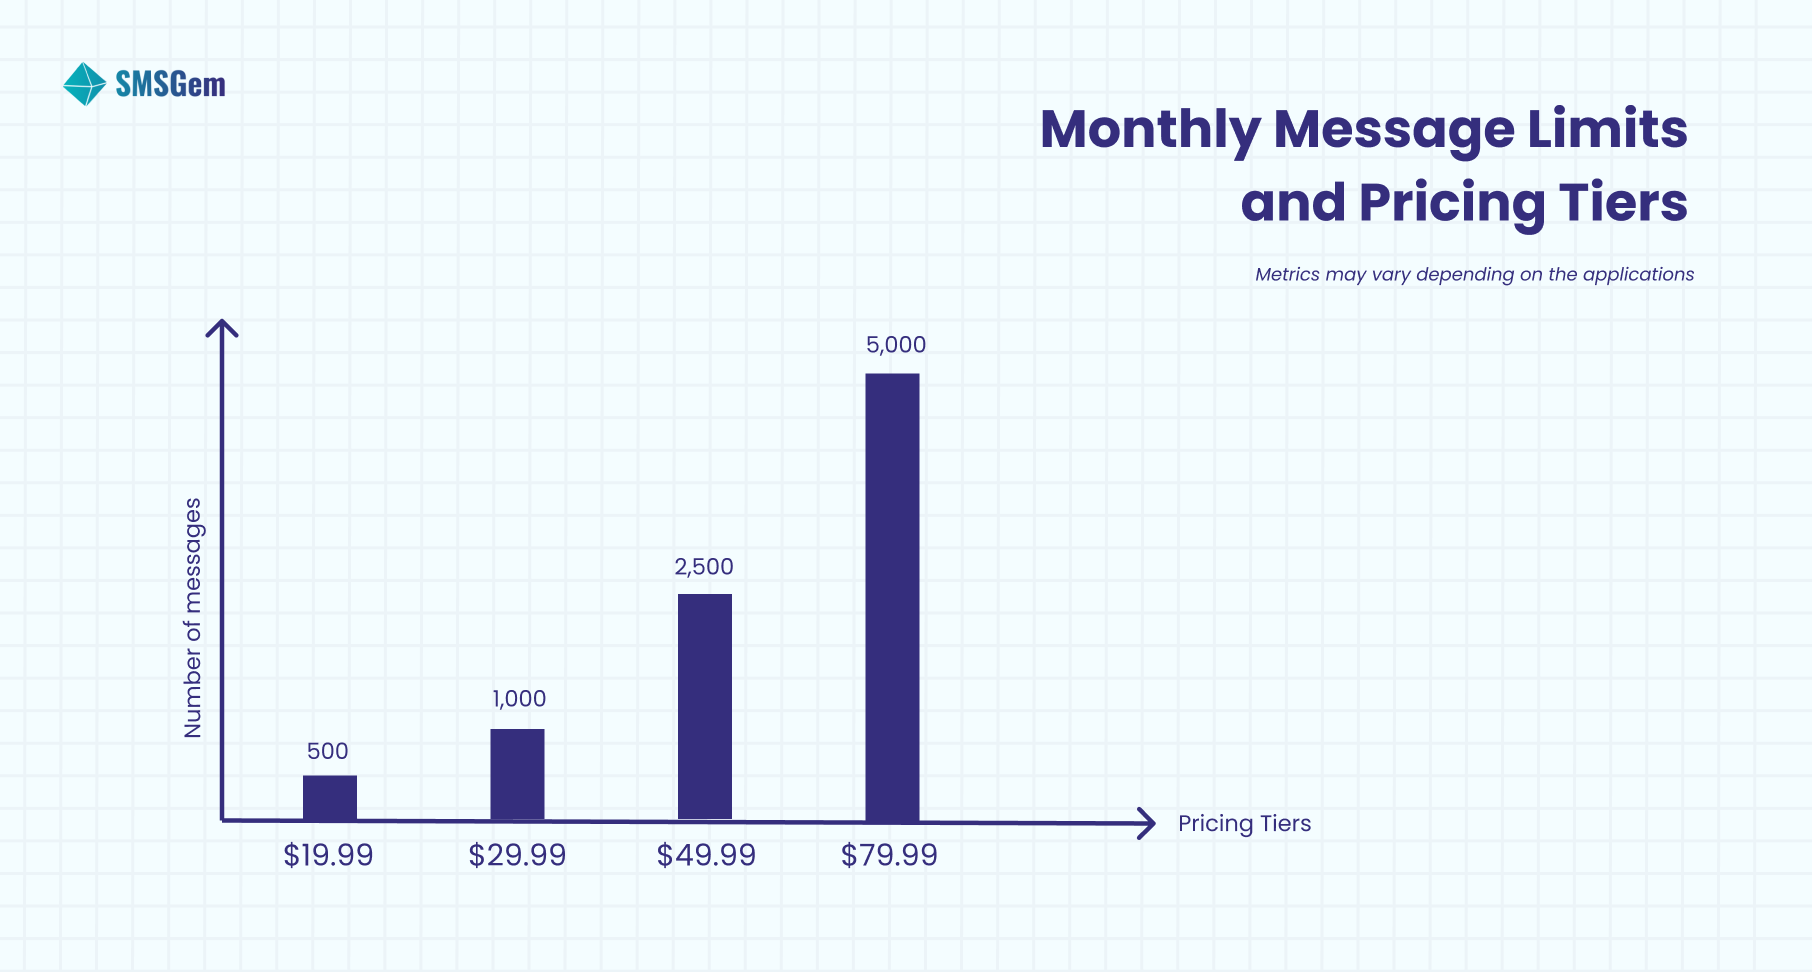 Monthly Message Limits and Pricing Tiers